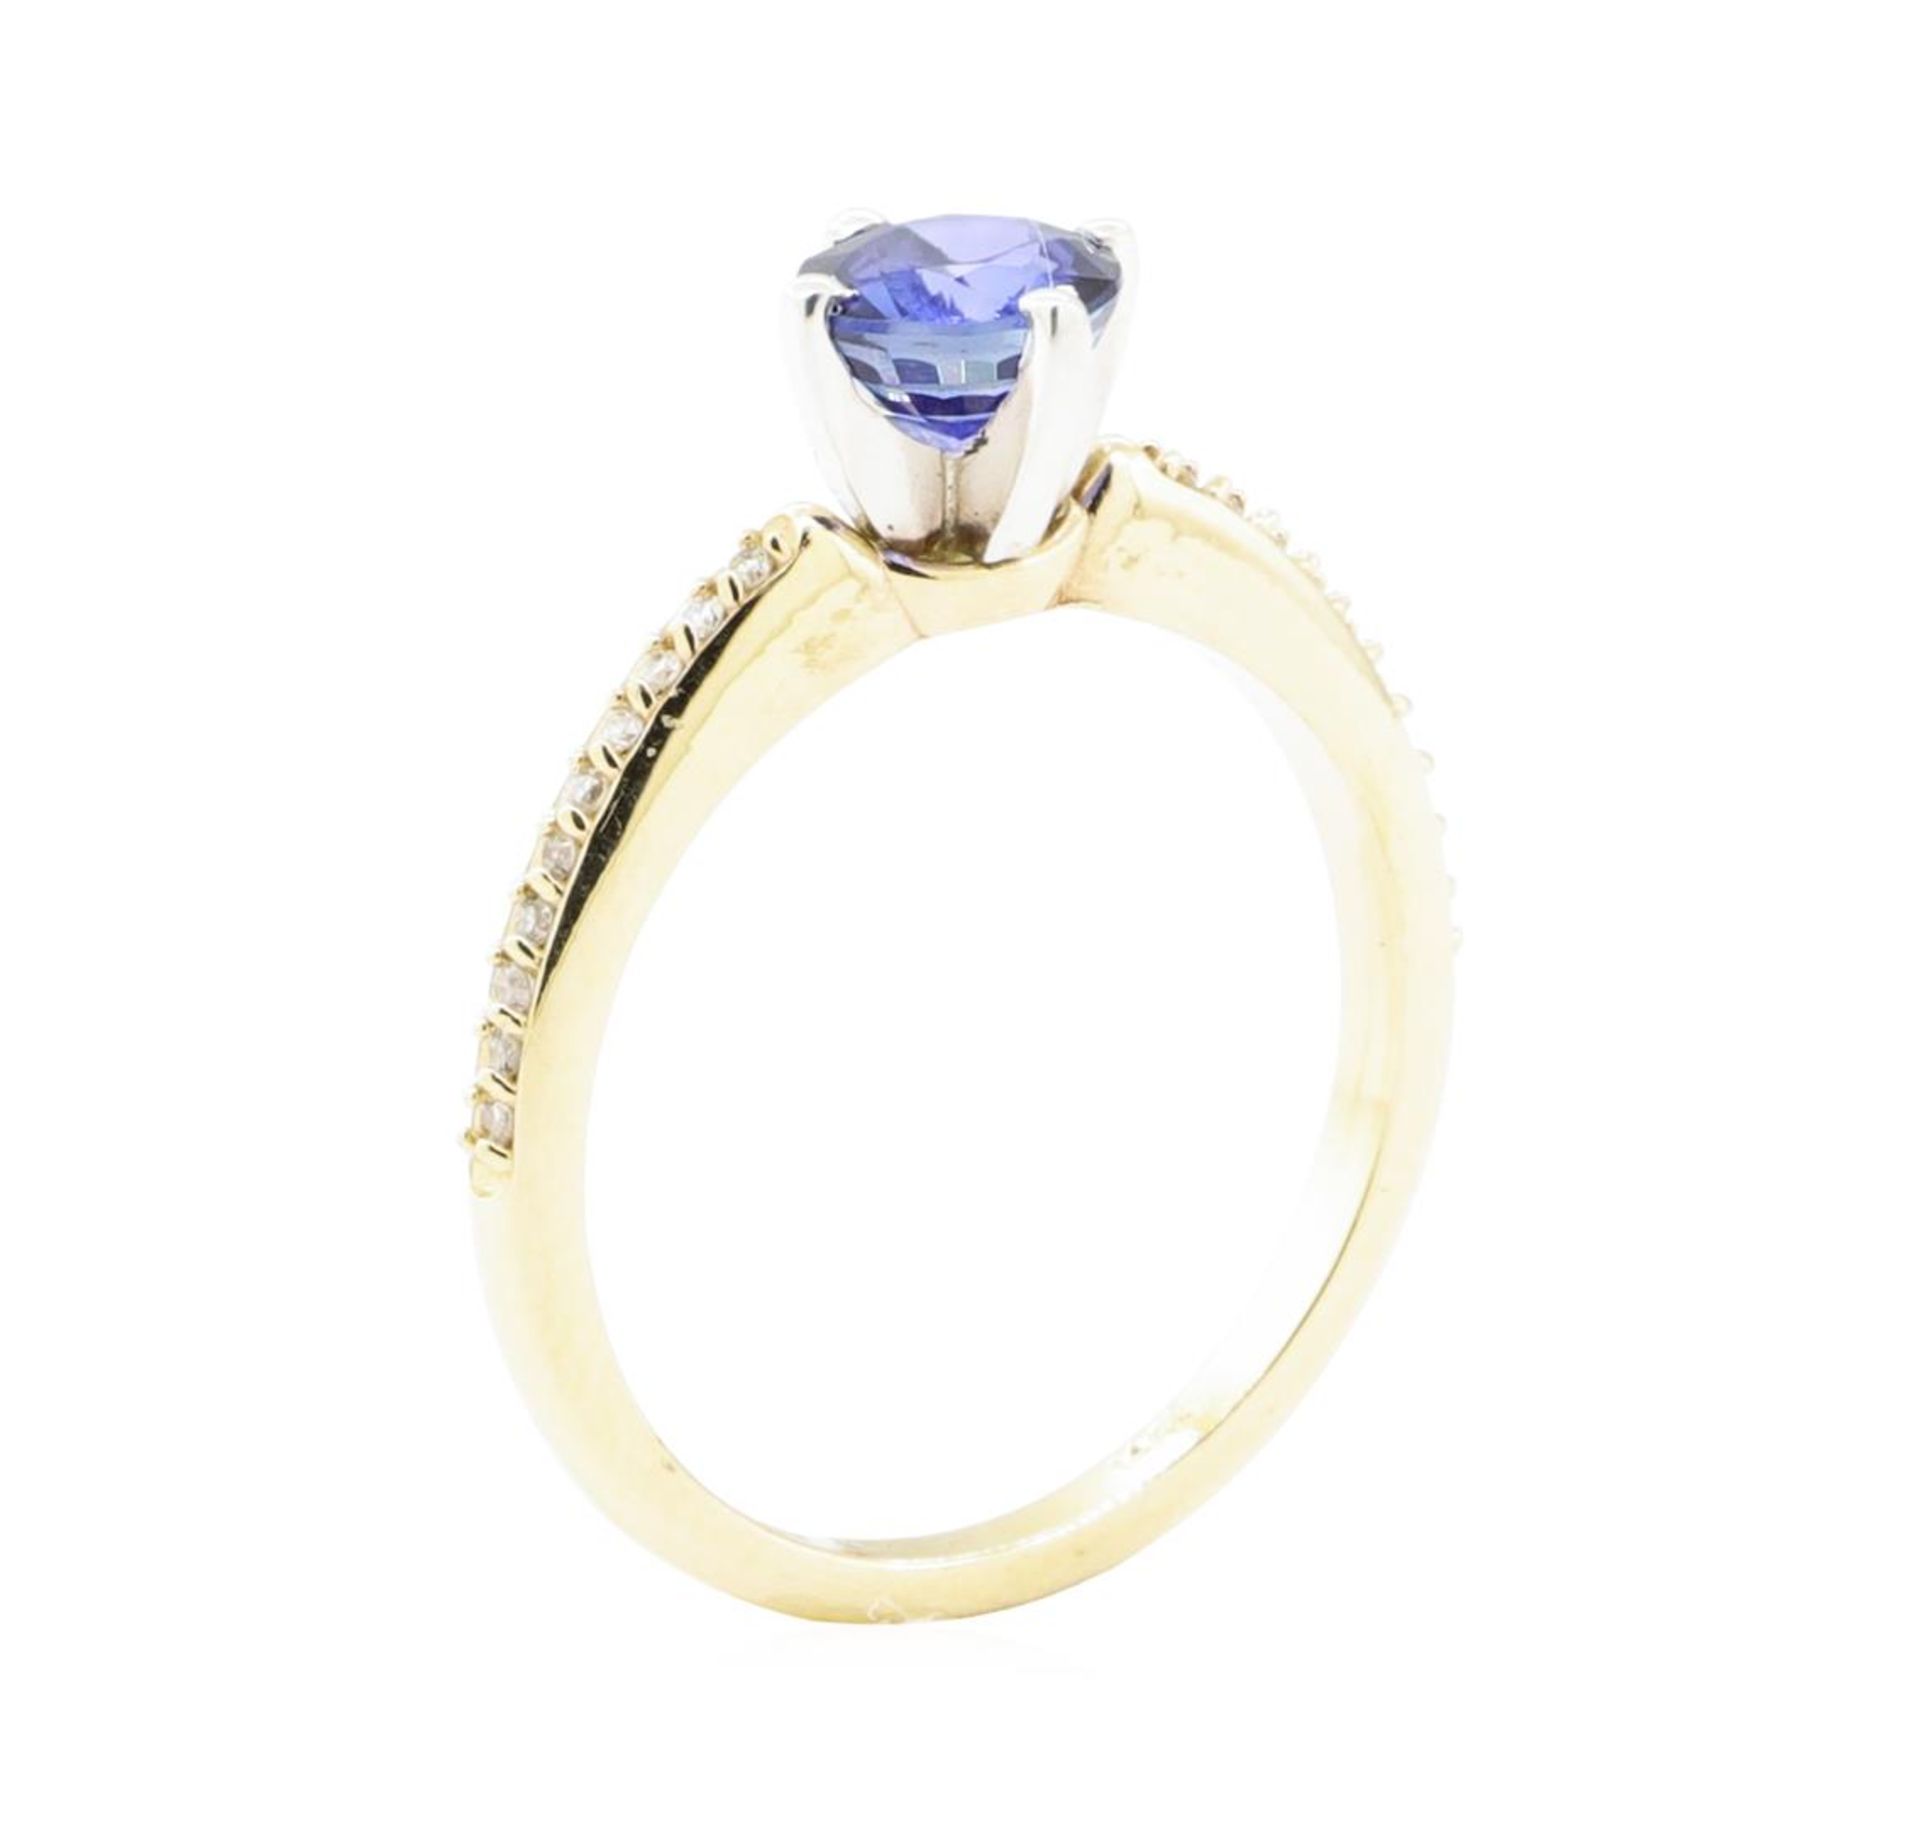 1.52 ctw Sapphire and Diamond Ring - 14KT Yellow Gold - Image 4 of 4